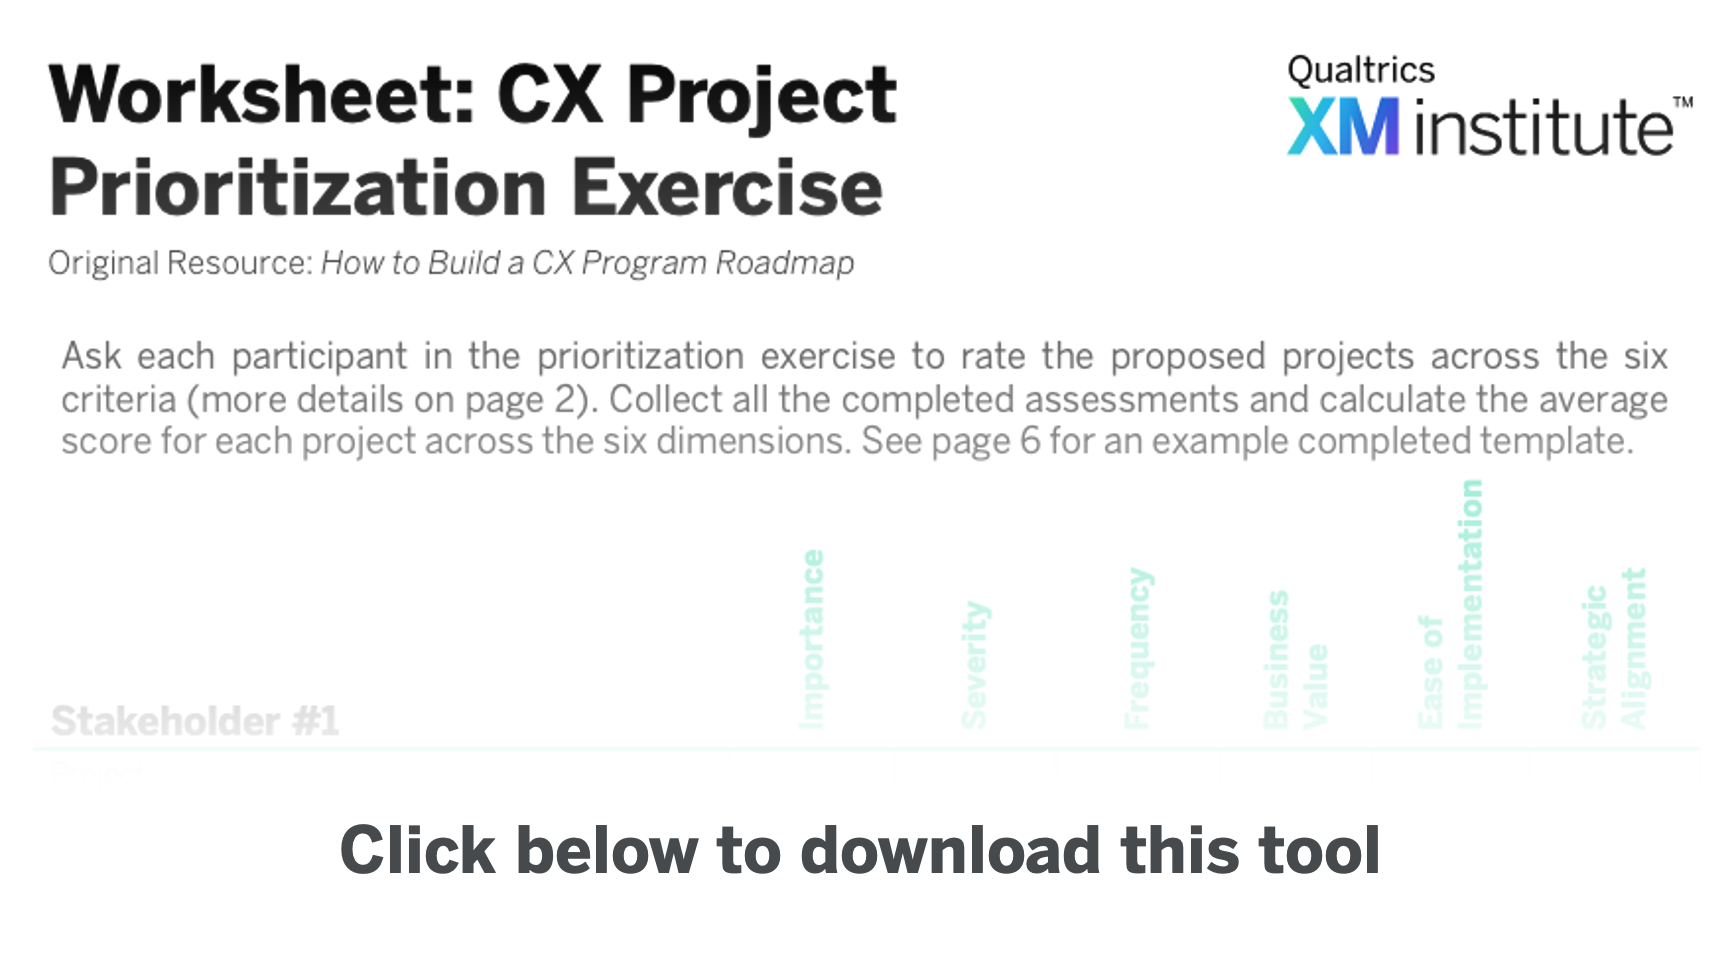 Download Image - CX Project Prioritization Exercise